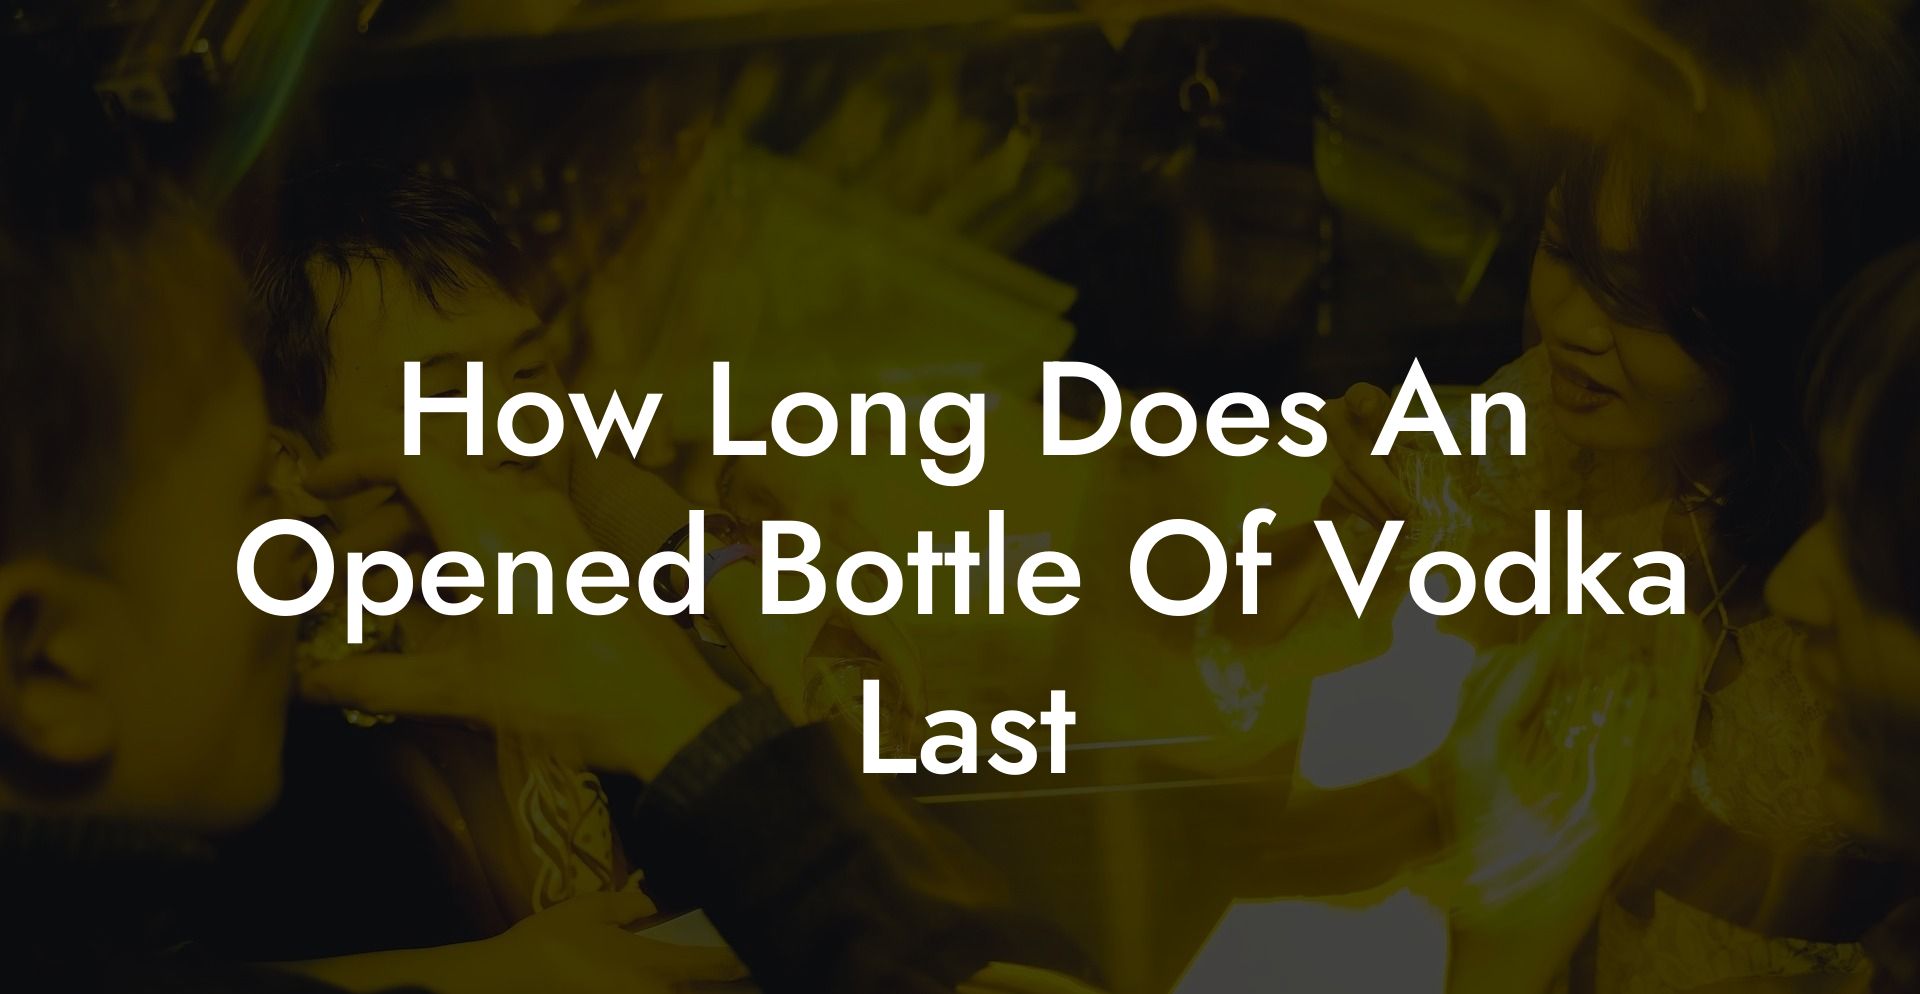 How Long Does An Opened Bottle Of Vodka Last